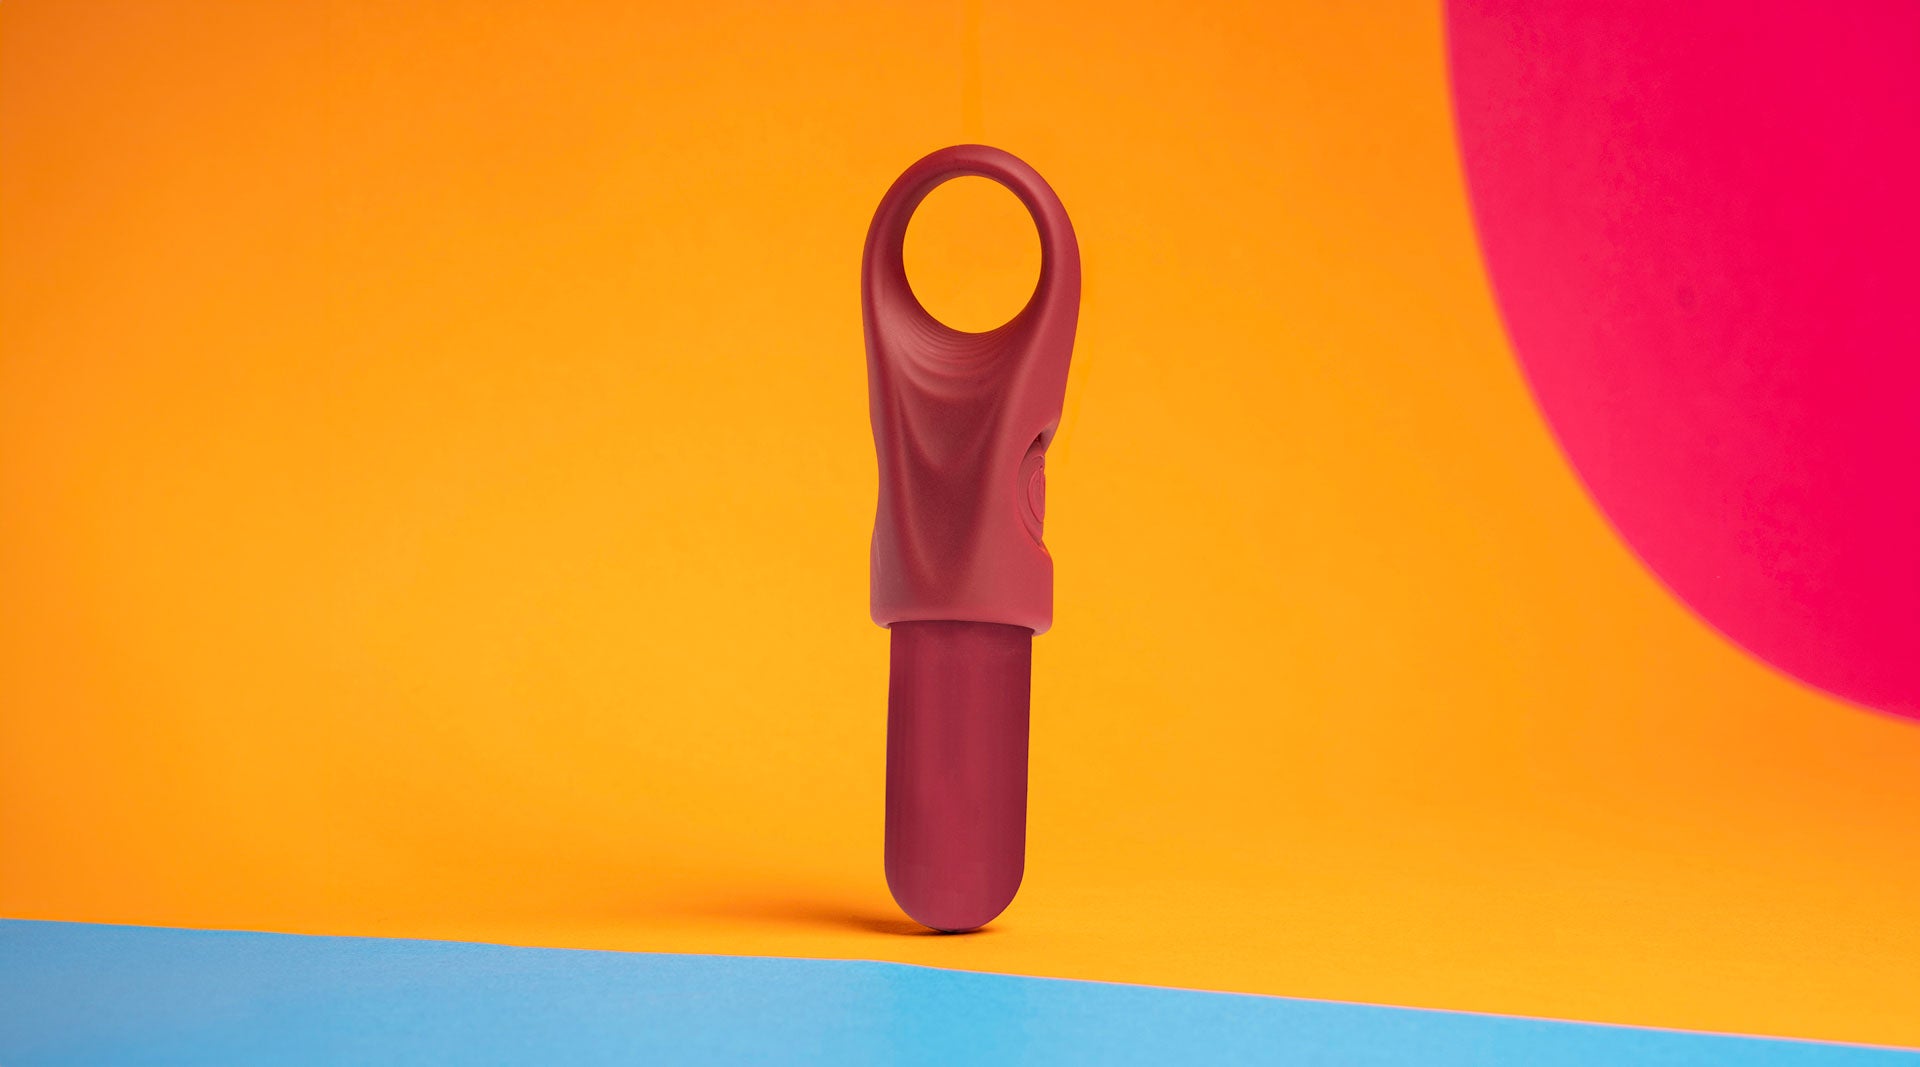 Ergonomic and accessible finger vibrator in burgundy housing a removable bullet vibrator.